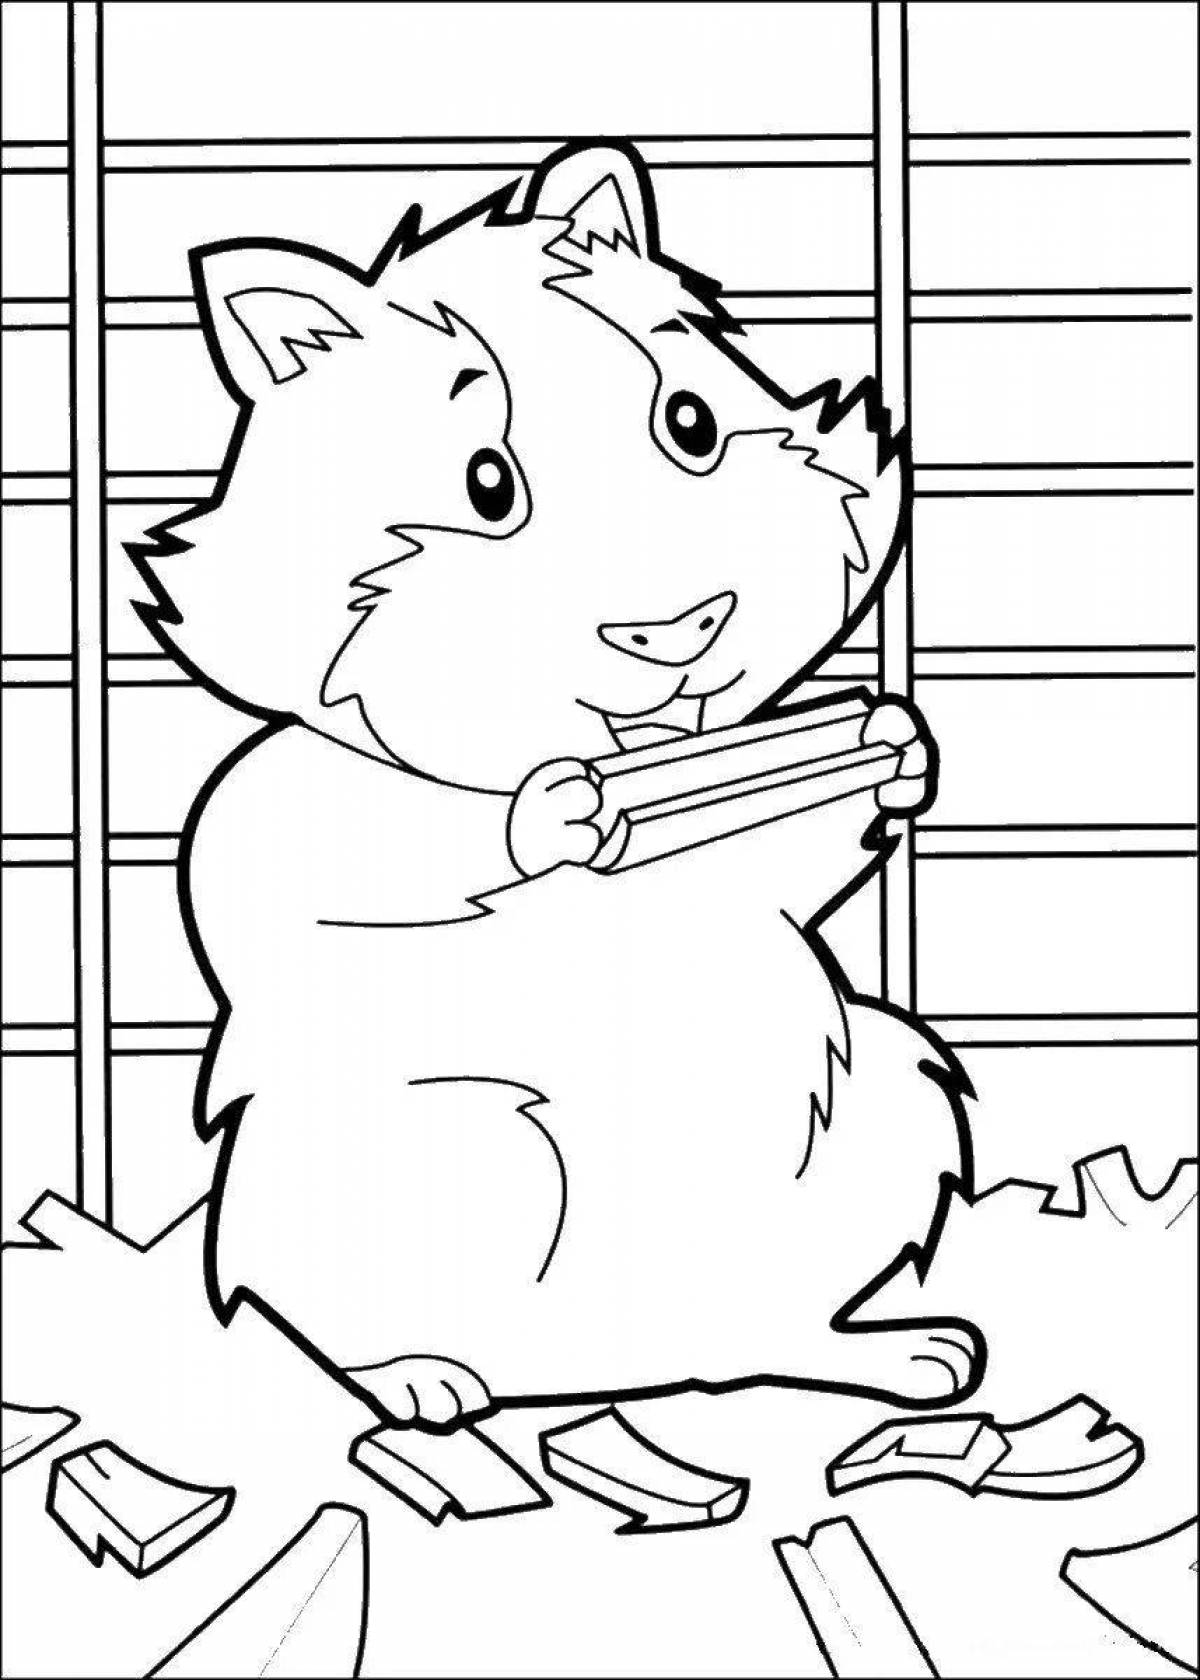 Happy coloring pages for hamsters